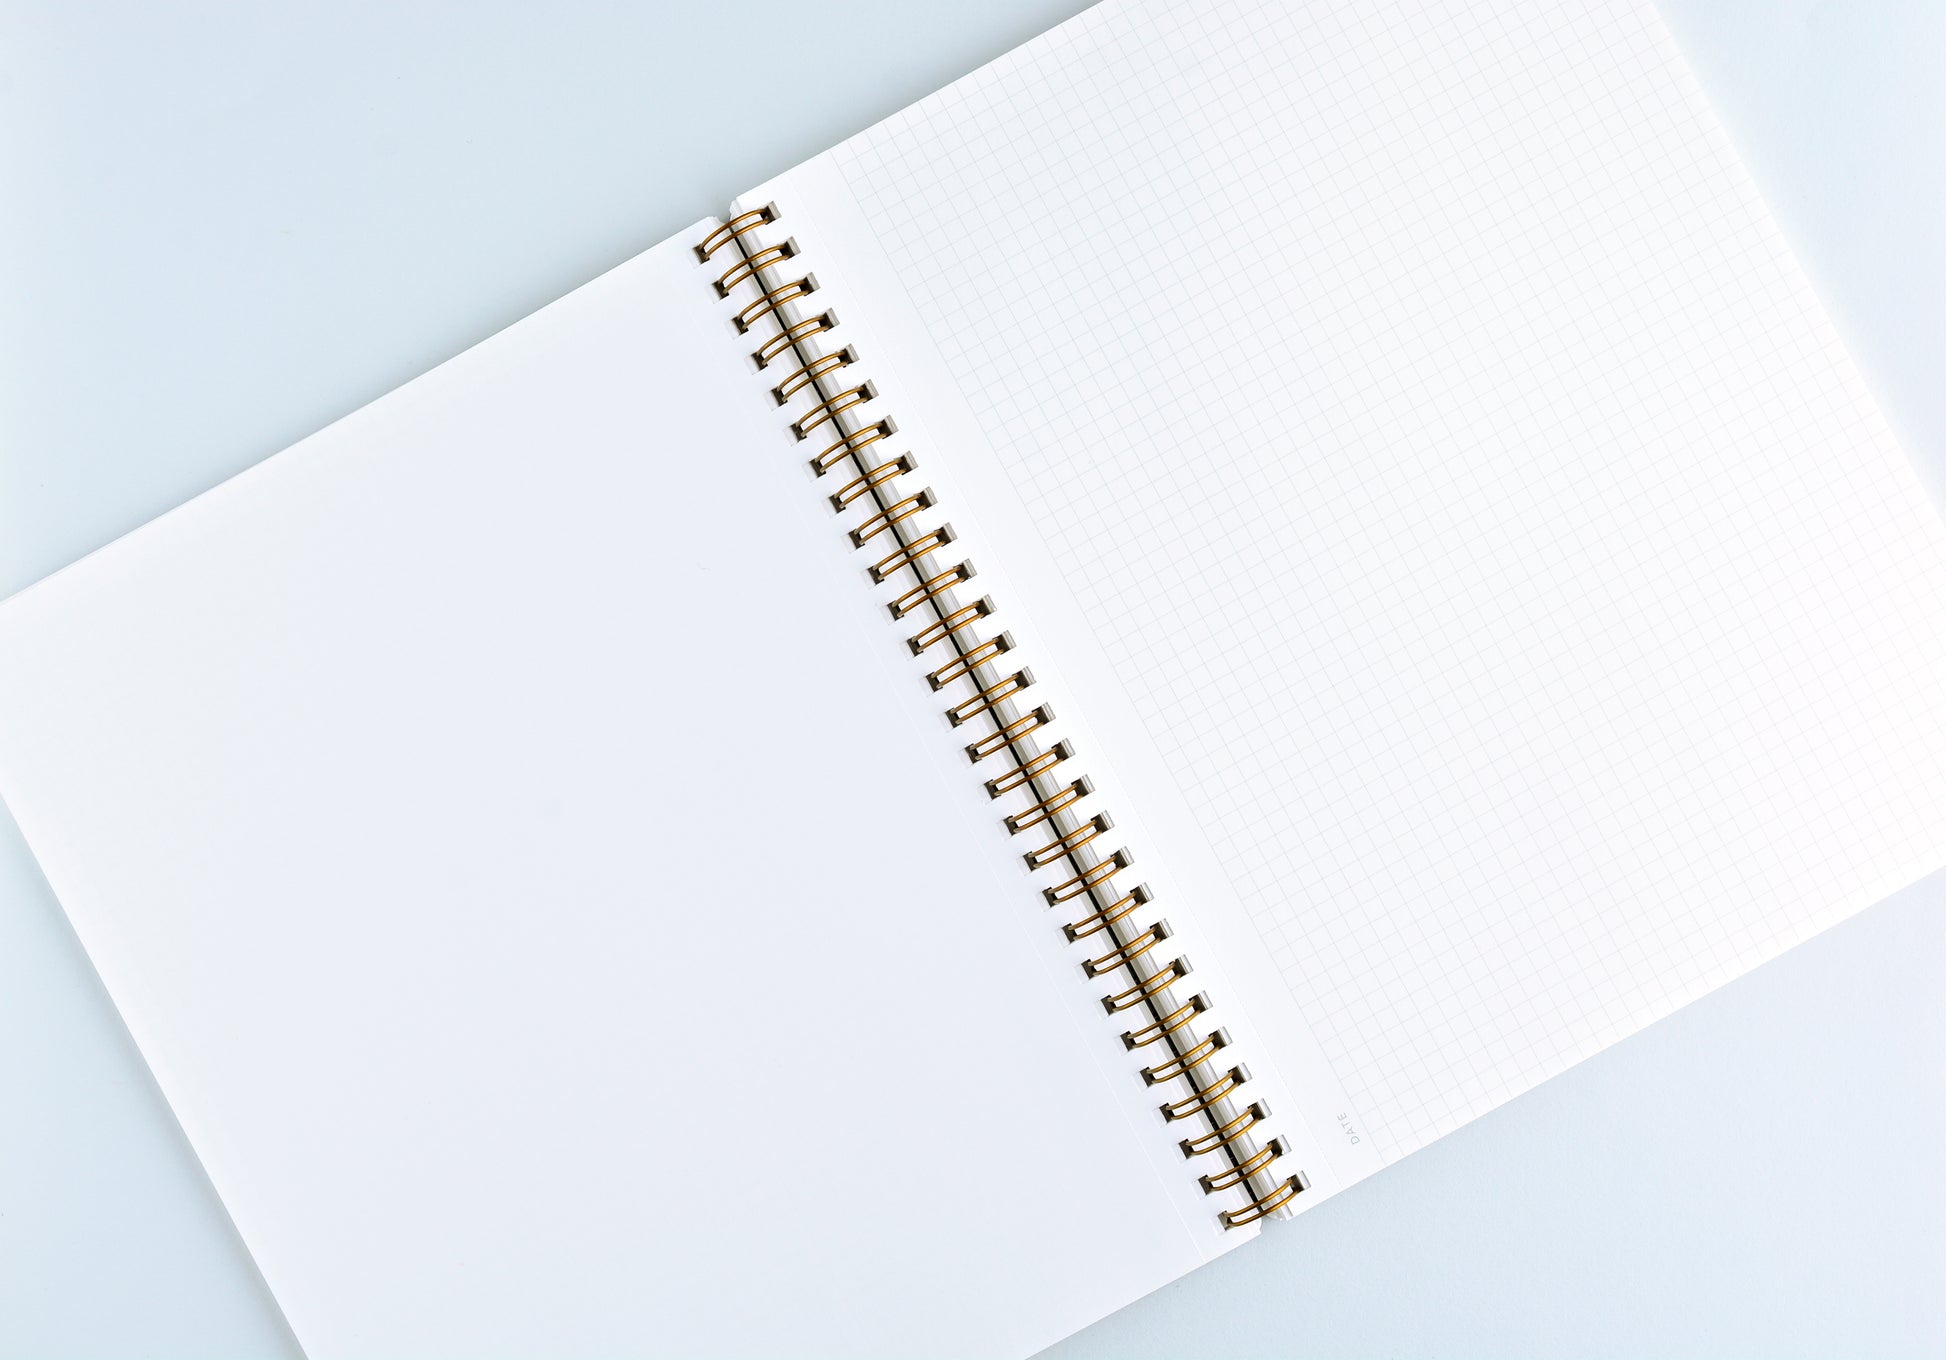 Appointed Chambray Notebook | Lined or Grid 